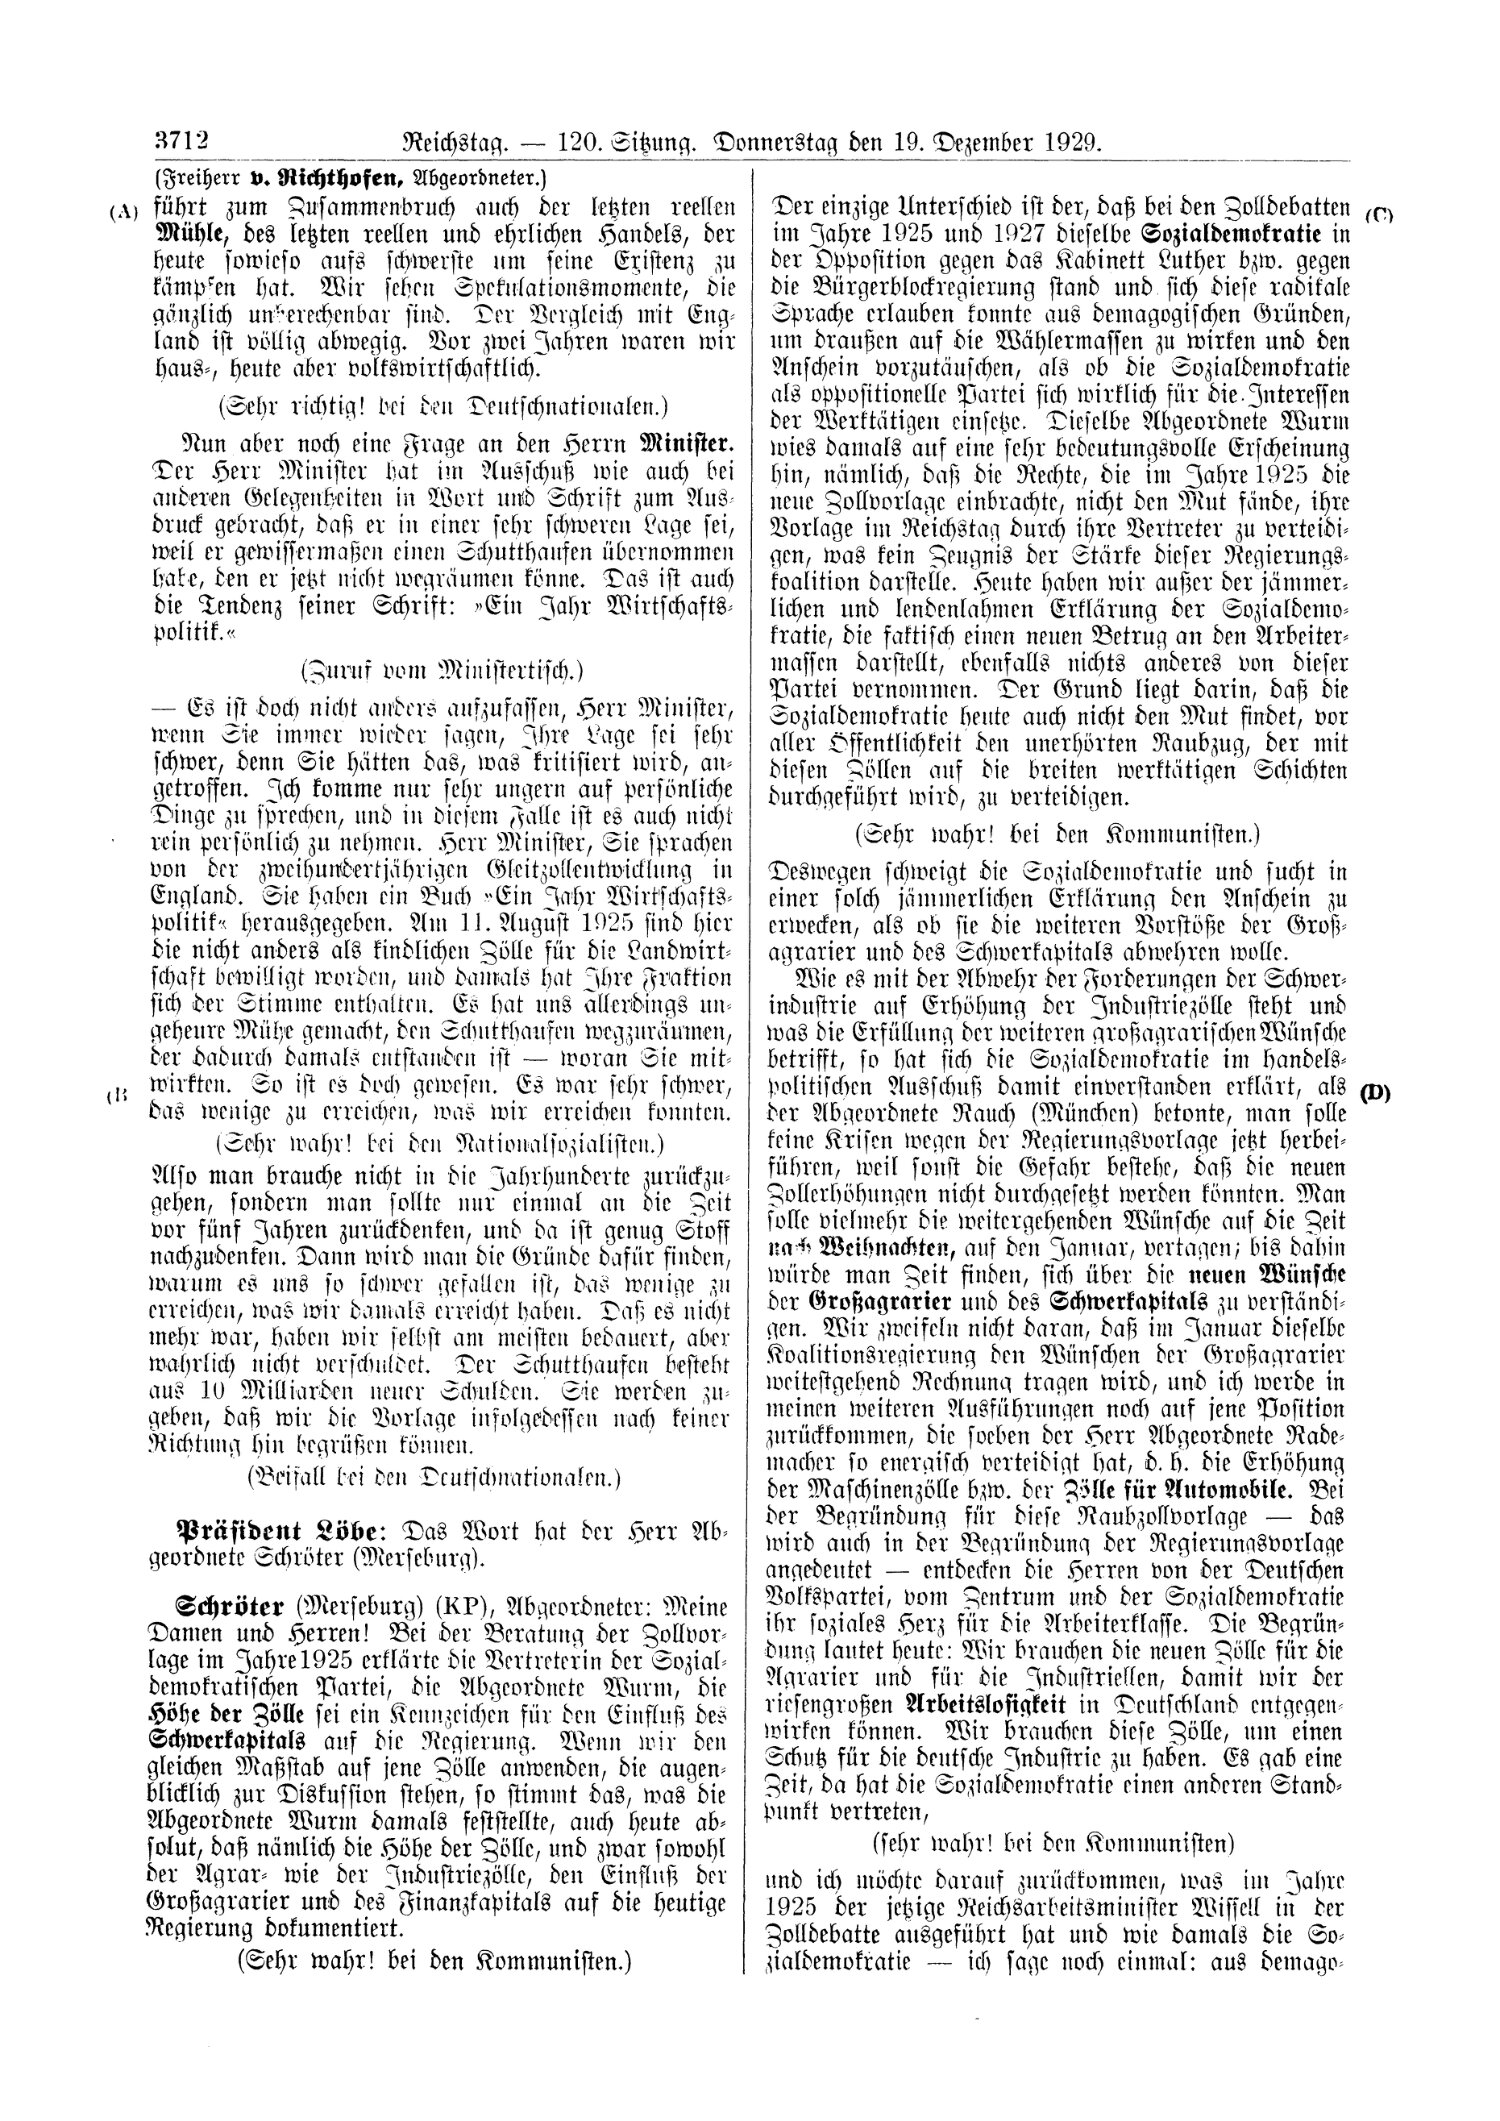 Scan of page 3712